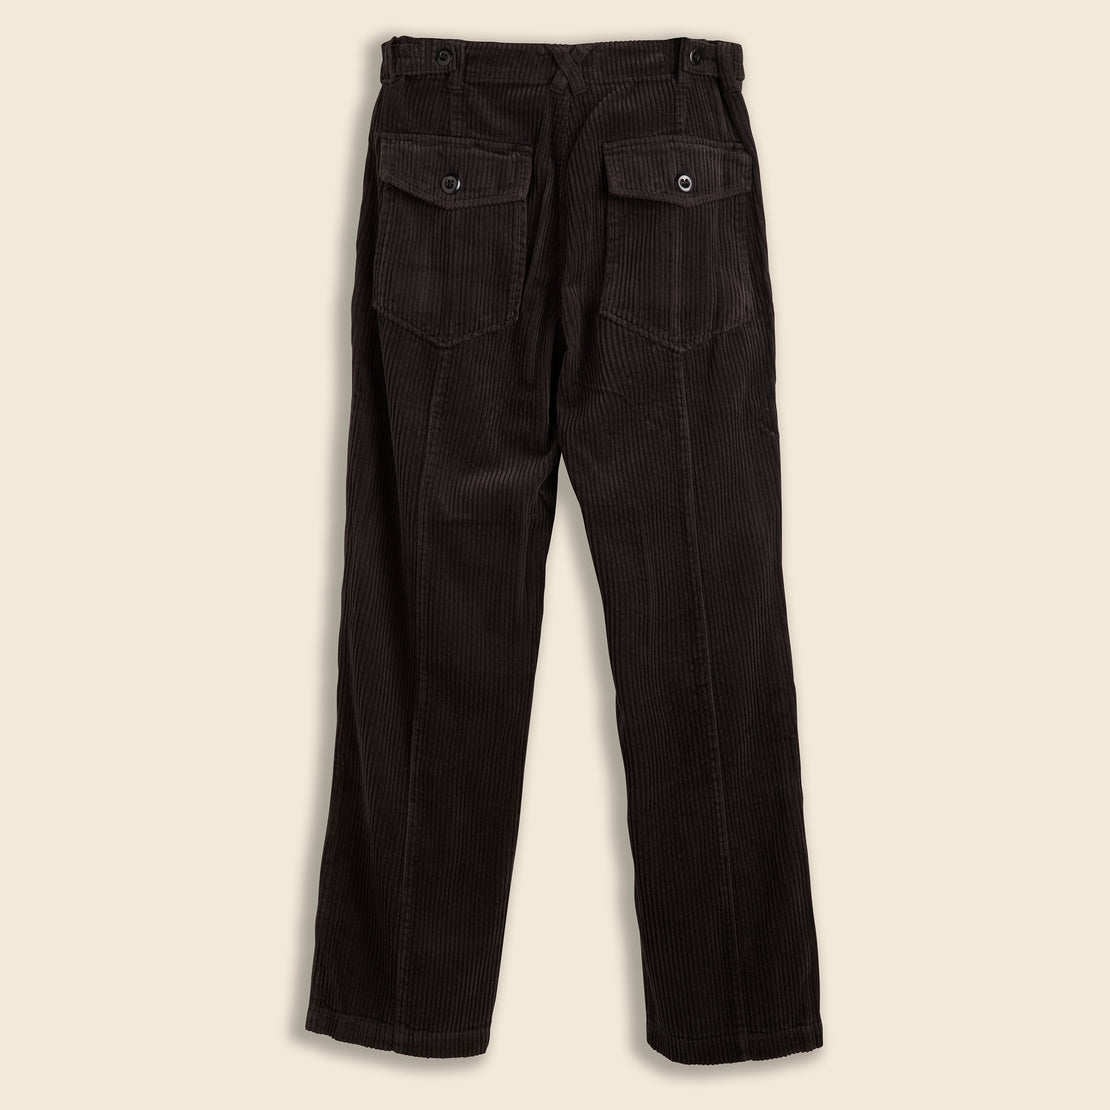 ICPANS Corduroy Mens Classic Mens Corduroy Trousers Straight, Thick, Warm,  High Waist, Plus Size 40 44 462338 From Zazvf, $61.93 | DHgate.Com